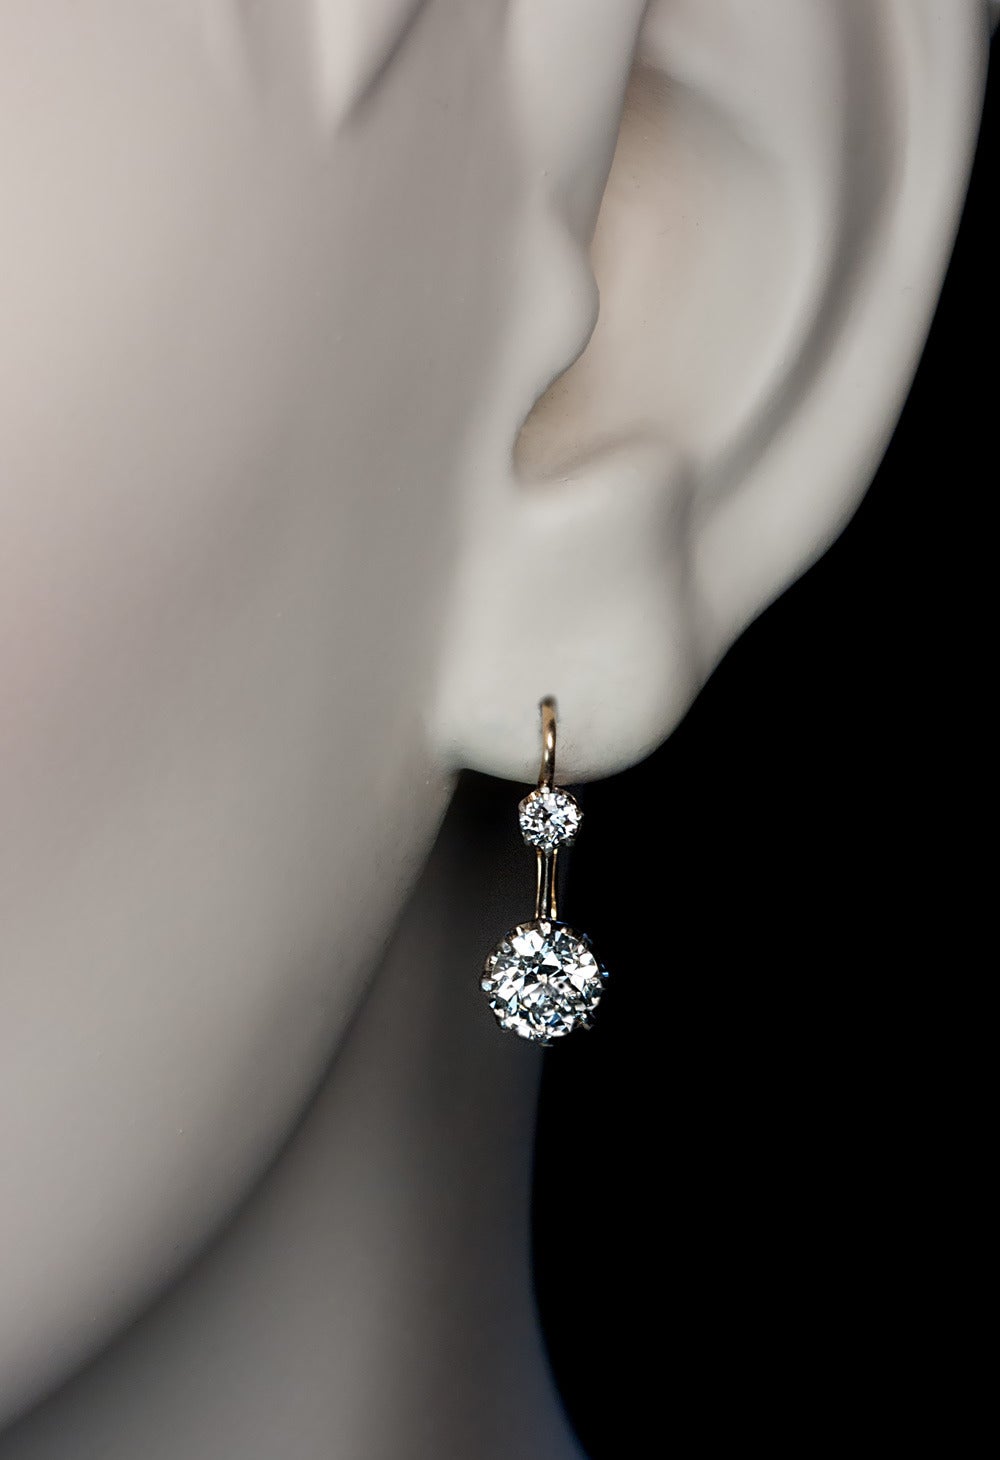 Circa 1910

The silver topped 14K gold leverback earrings are prong-set with four sparkling old European cut diamonds:

 0.85 ct, 0.87 ct, 0.11 ct and 0.11 ct

 Total diamond weight 1.94 ct

 Length with ear wire 19 mm (3/4 in.)